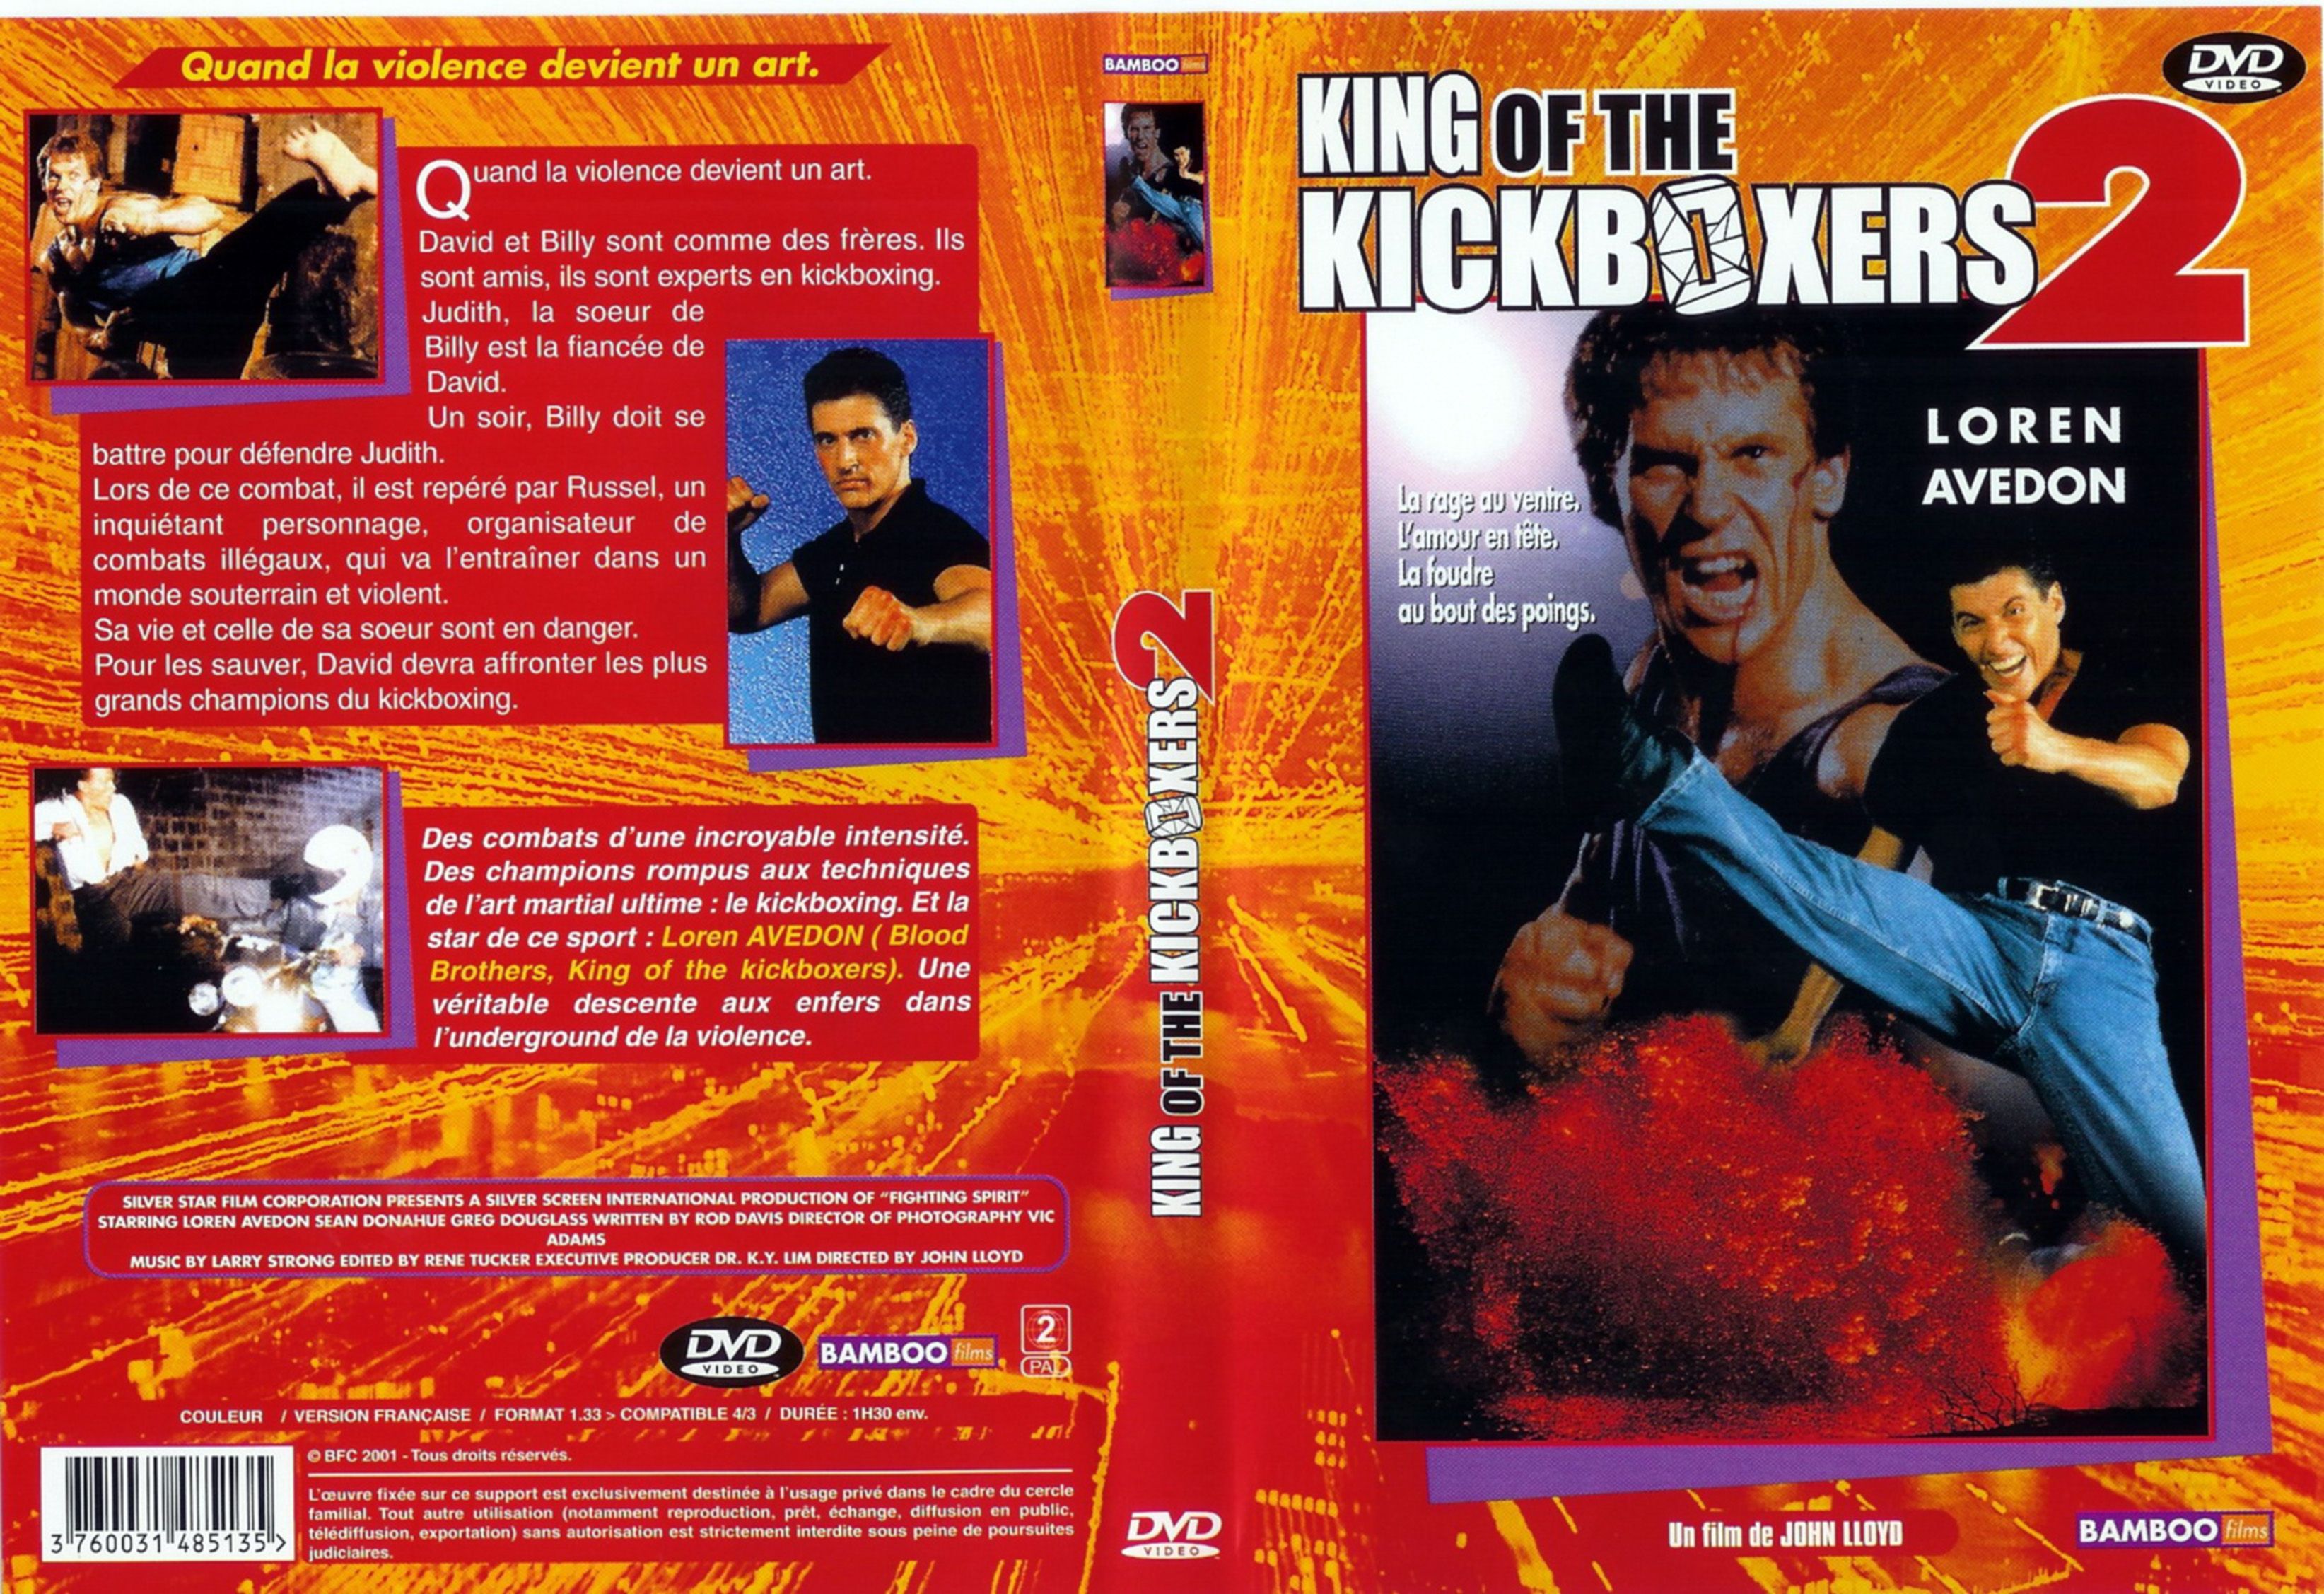 Jaquette DVD King of the kickboxers 2 v2